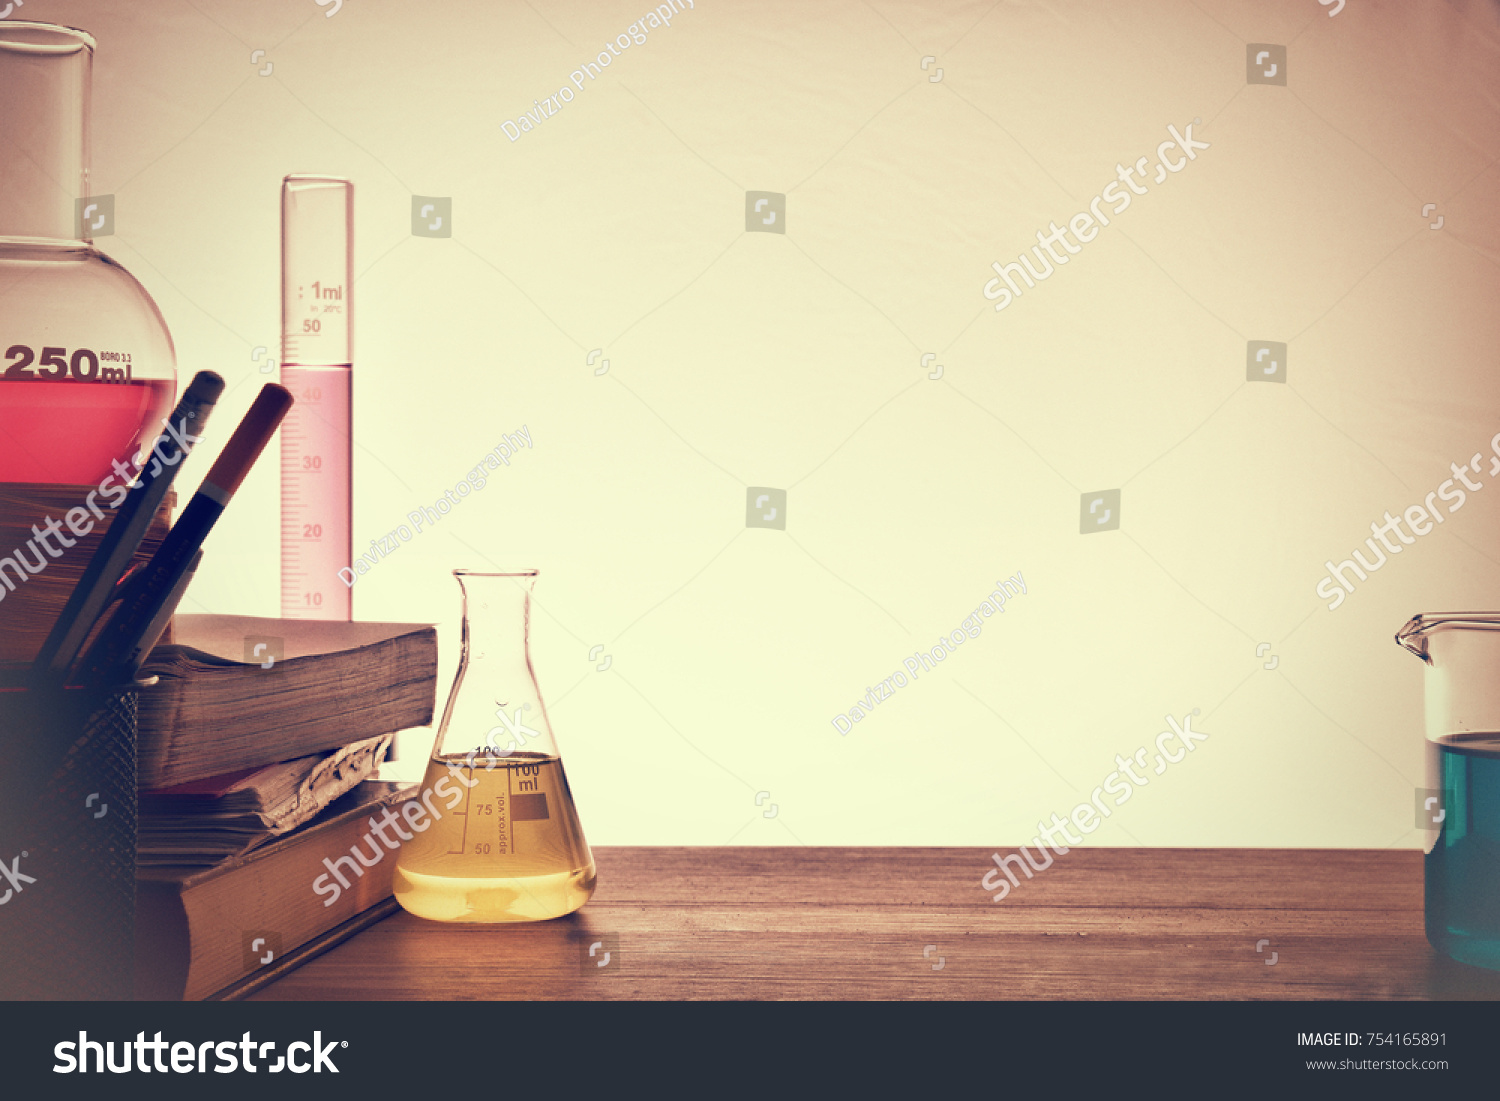 Classroom desk of chemistry teaching with books and instruments. Chemical sciences education concept. Horizontal composition. Front view #754165891